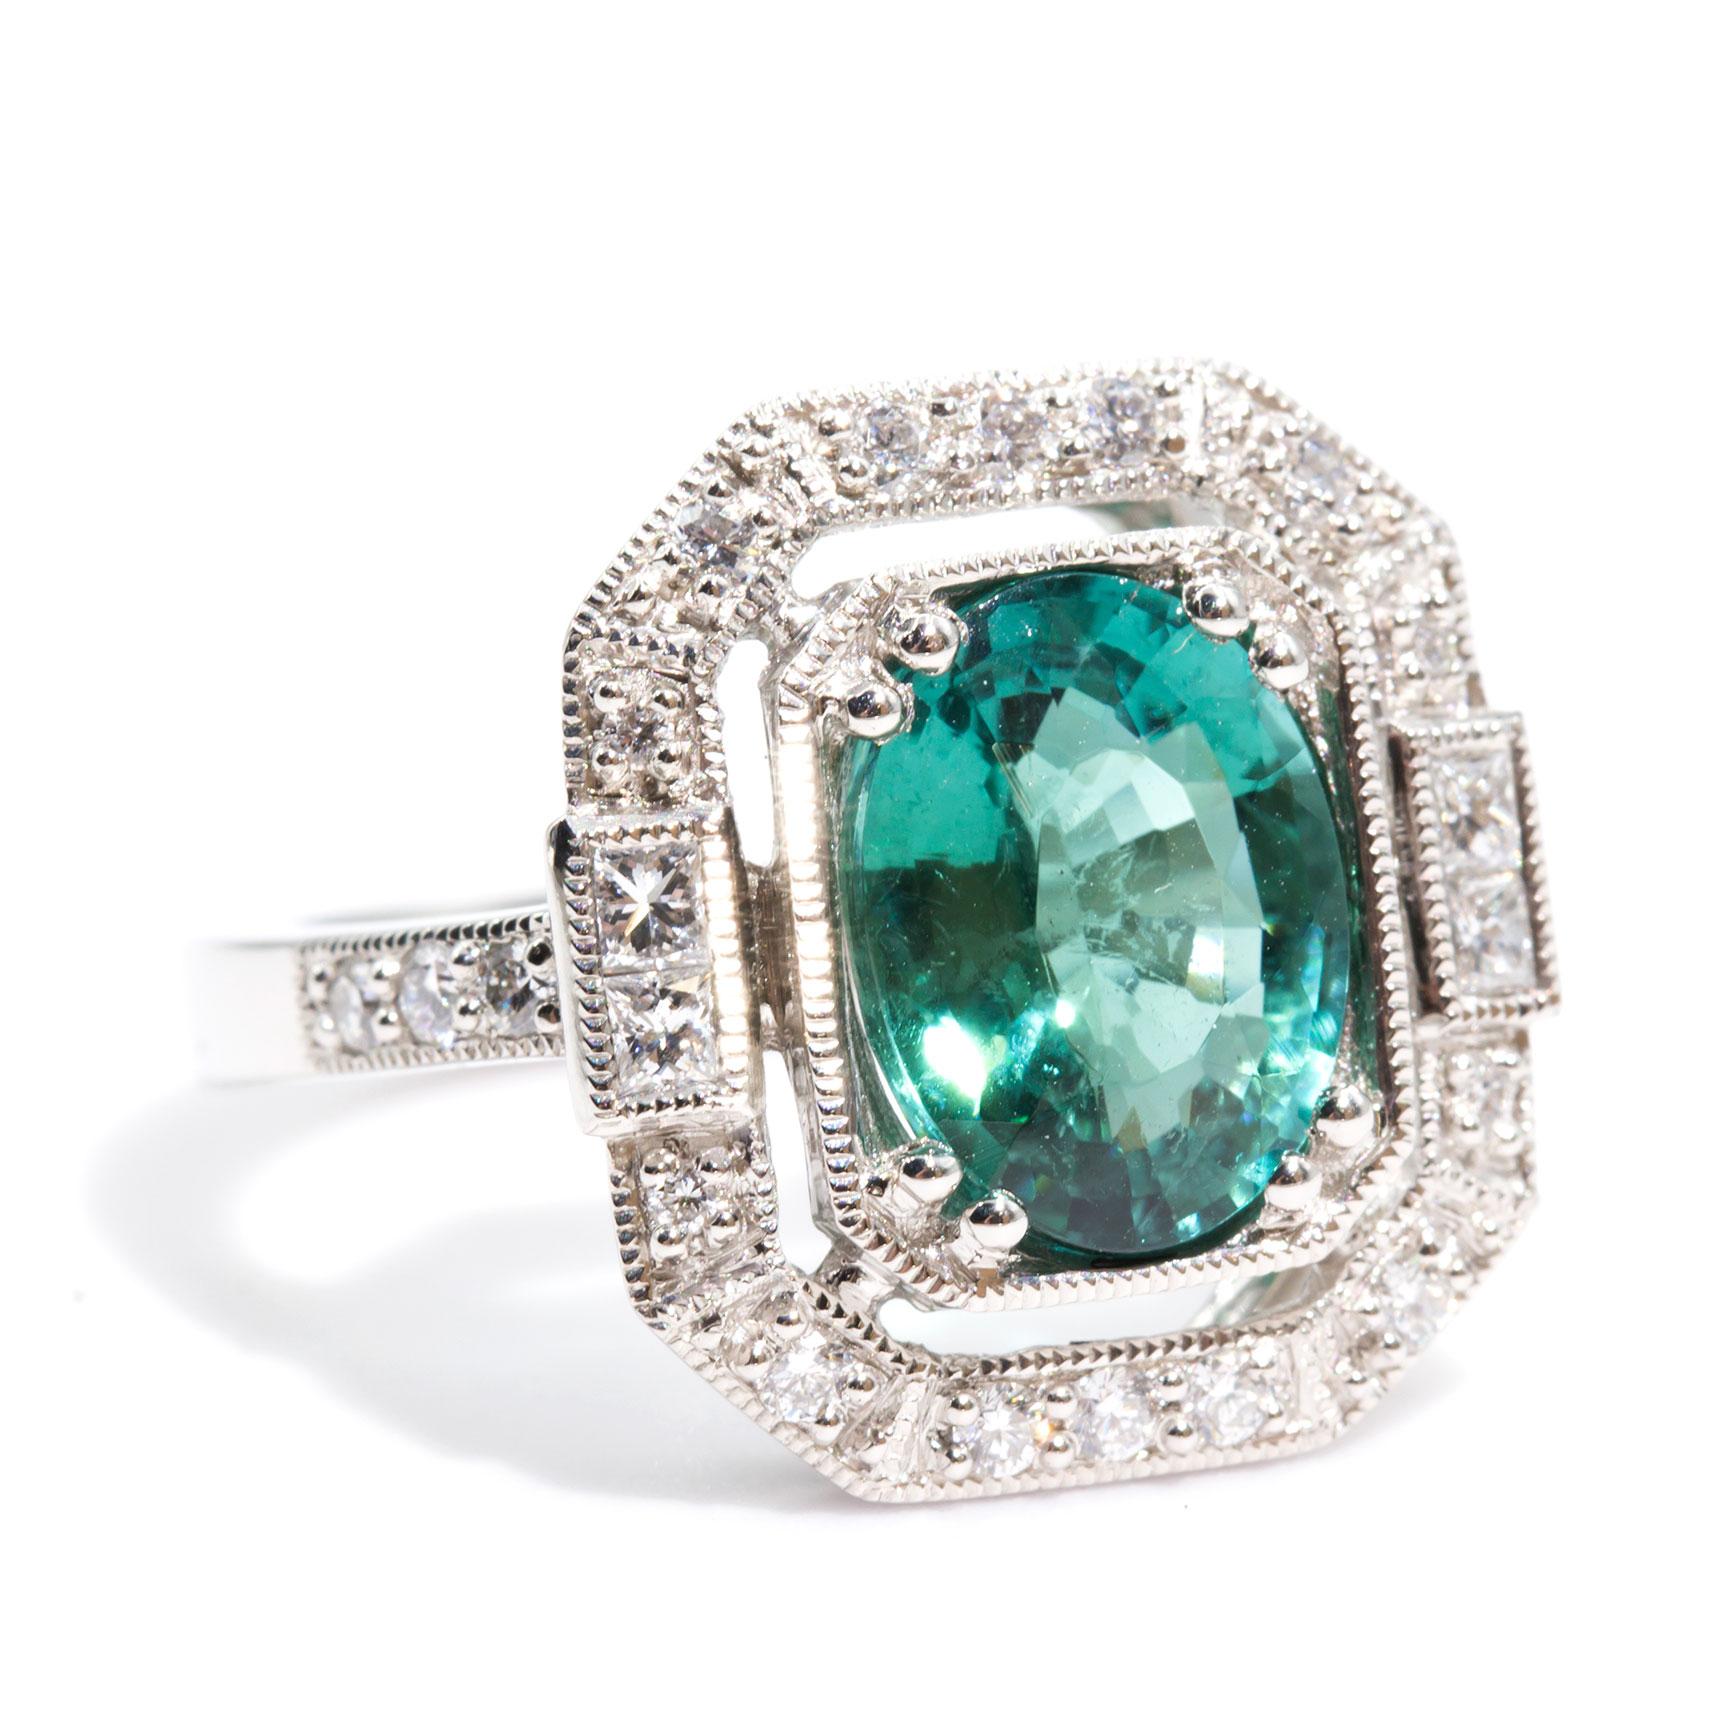 Forged in Platinum, this art deco inspired halo ring features a striking 3.41 oval bright aqua tourmaline complemented by an ornate border of sparkling bead set round brilliant and princess cut diamonds, totalling 0.49 carats. The high polish flat